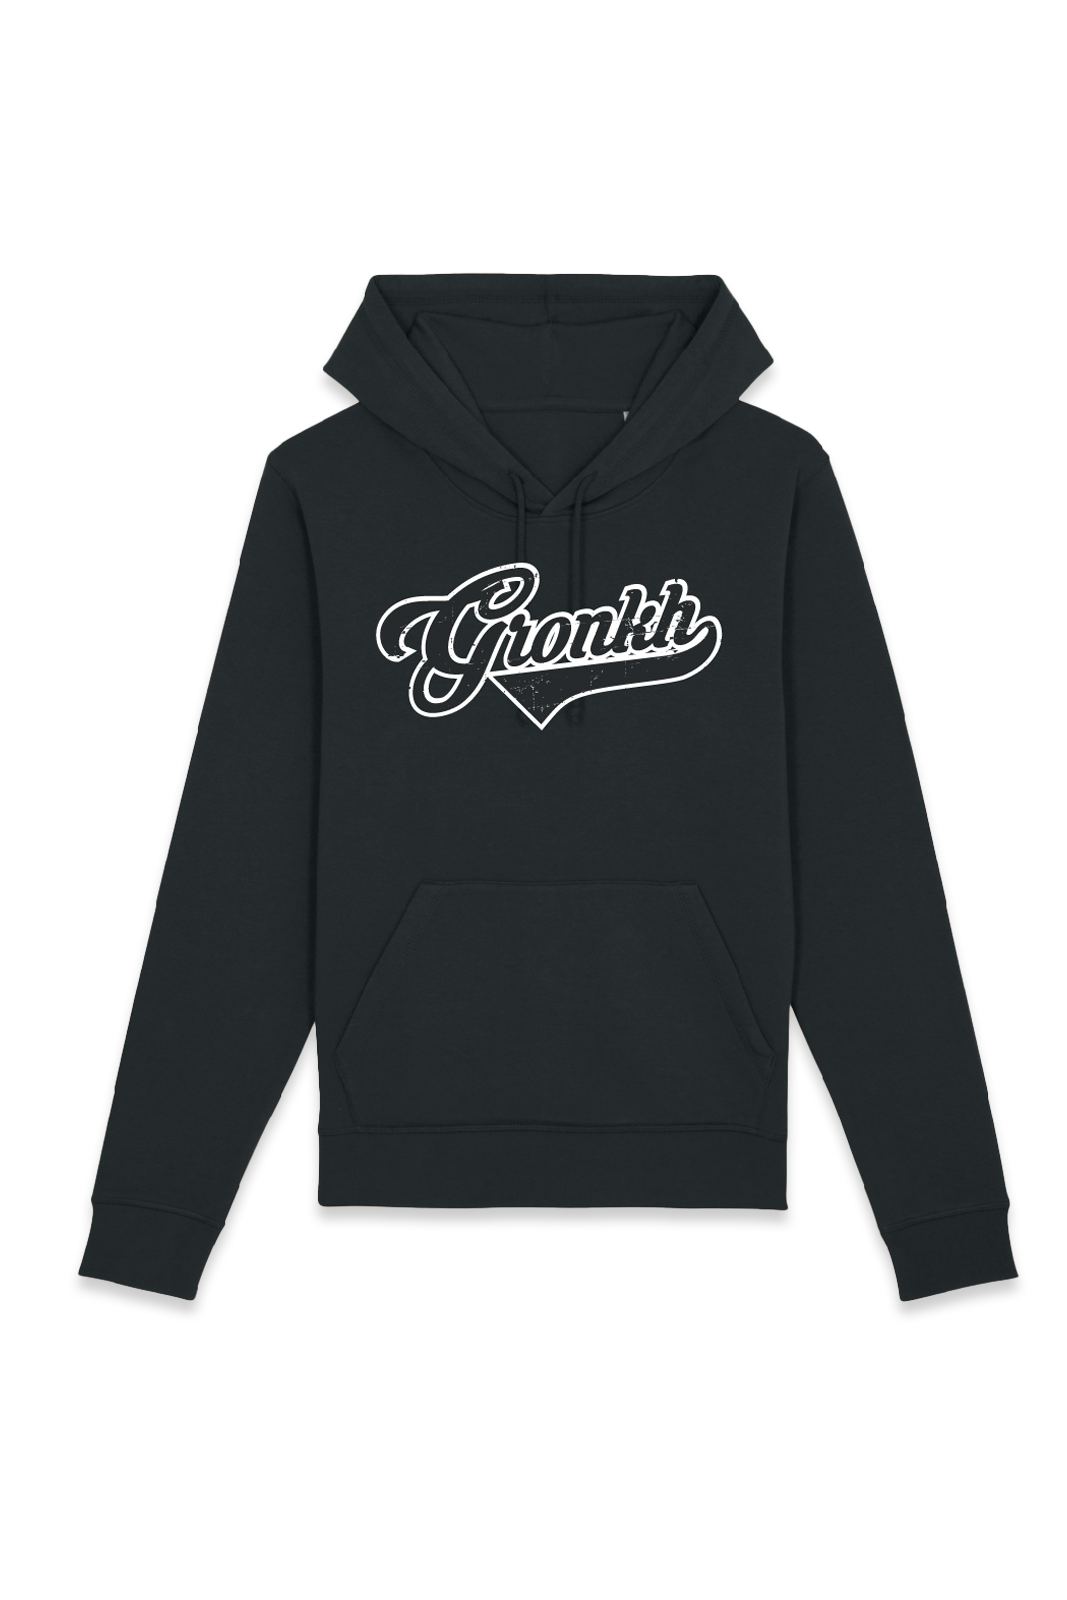 Hoodie - Gronkh Collection (Black&White)